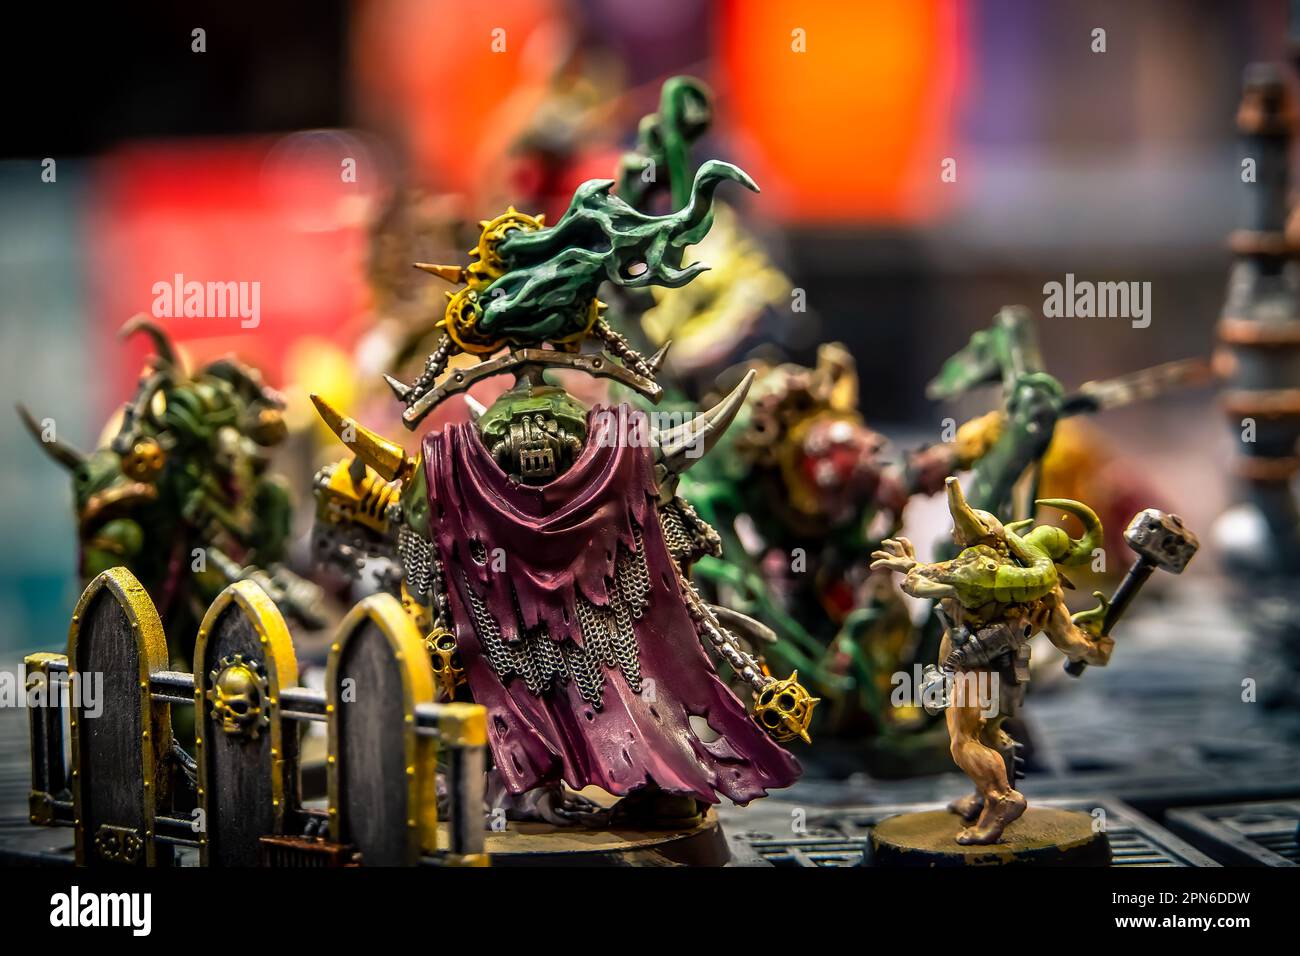 Warhammer is the first game spins a tale of deception across multiple factions, each with unique strengths and tools to level the battlefield. Stock Photo